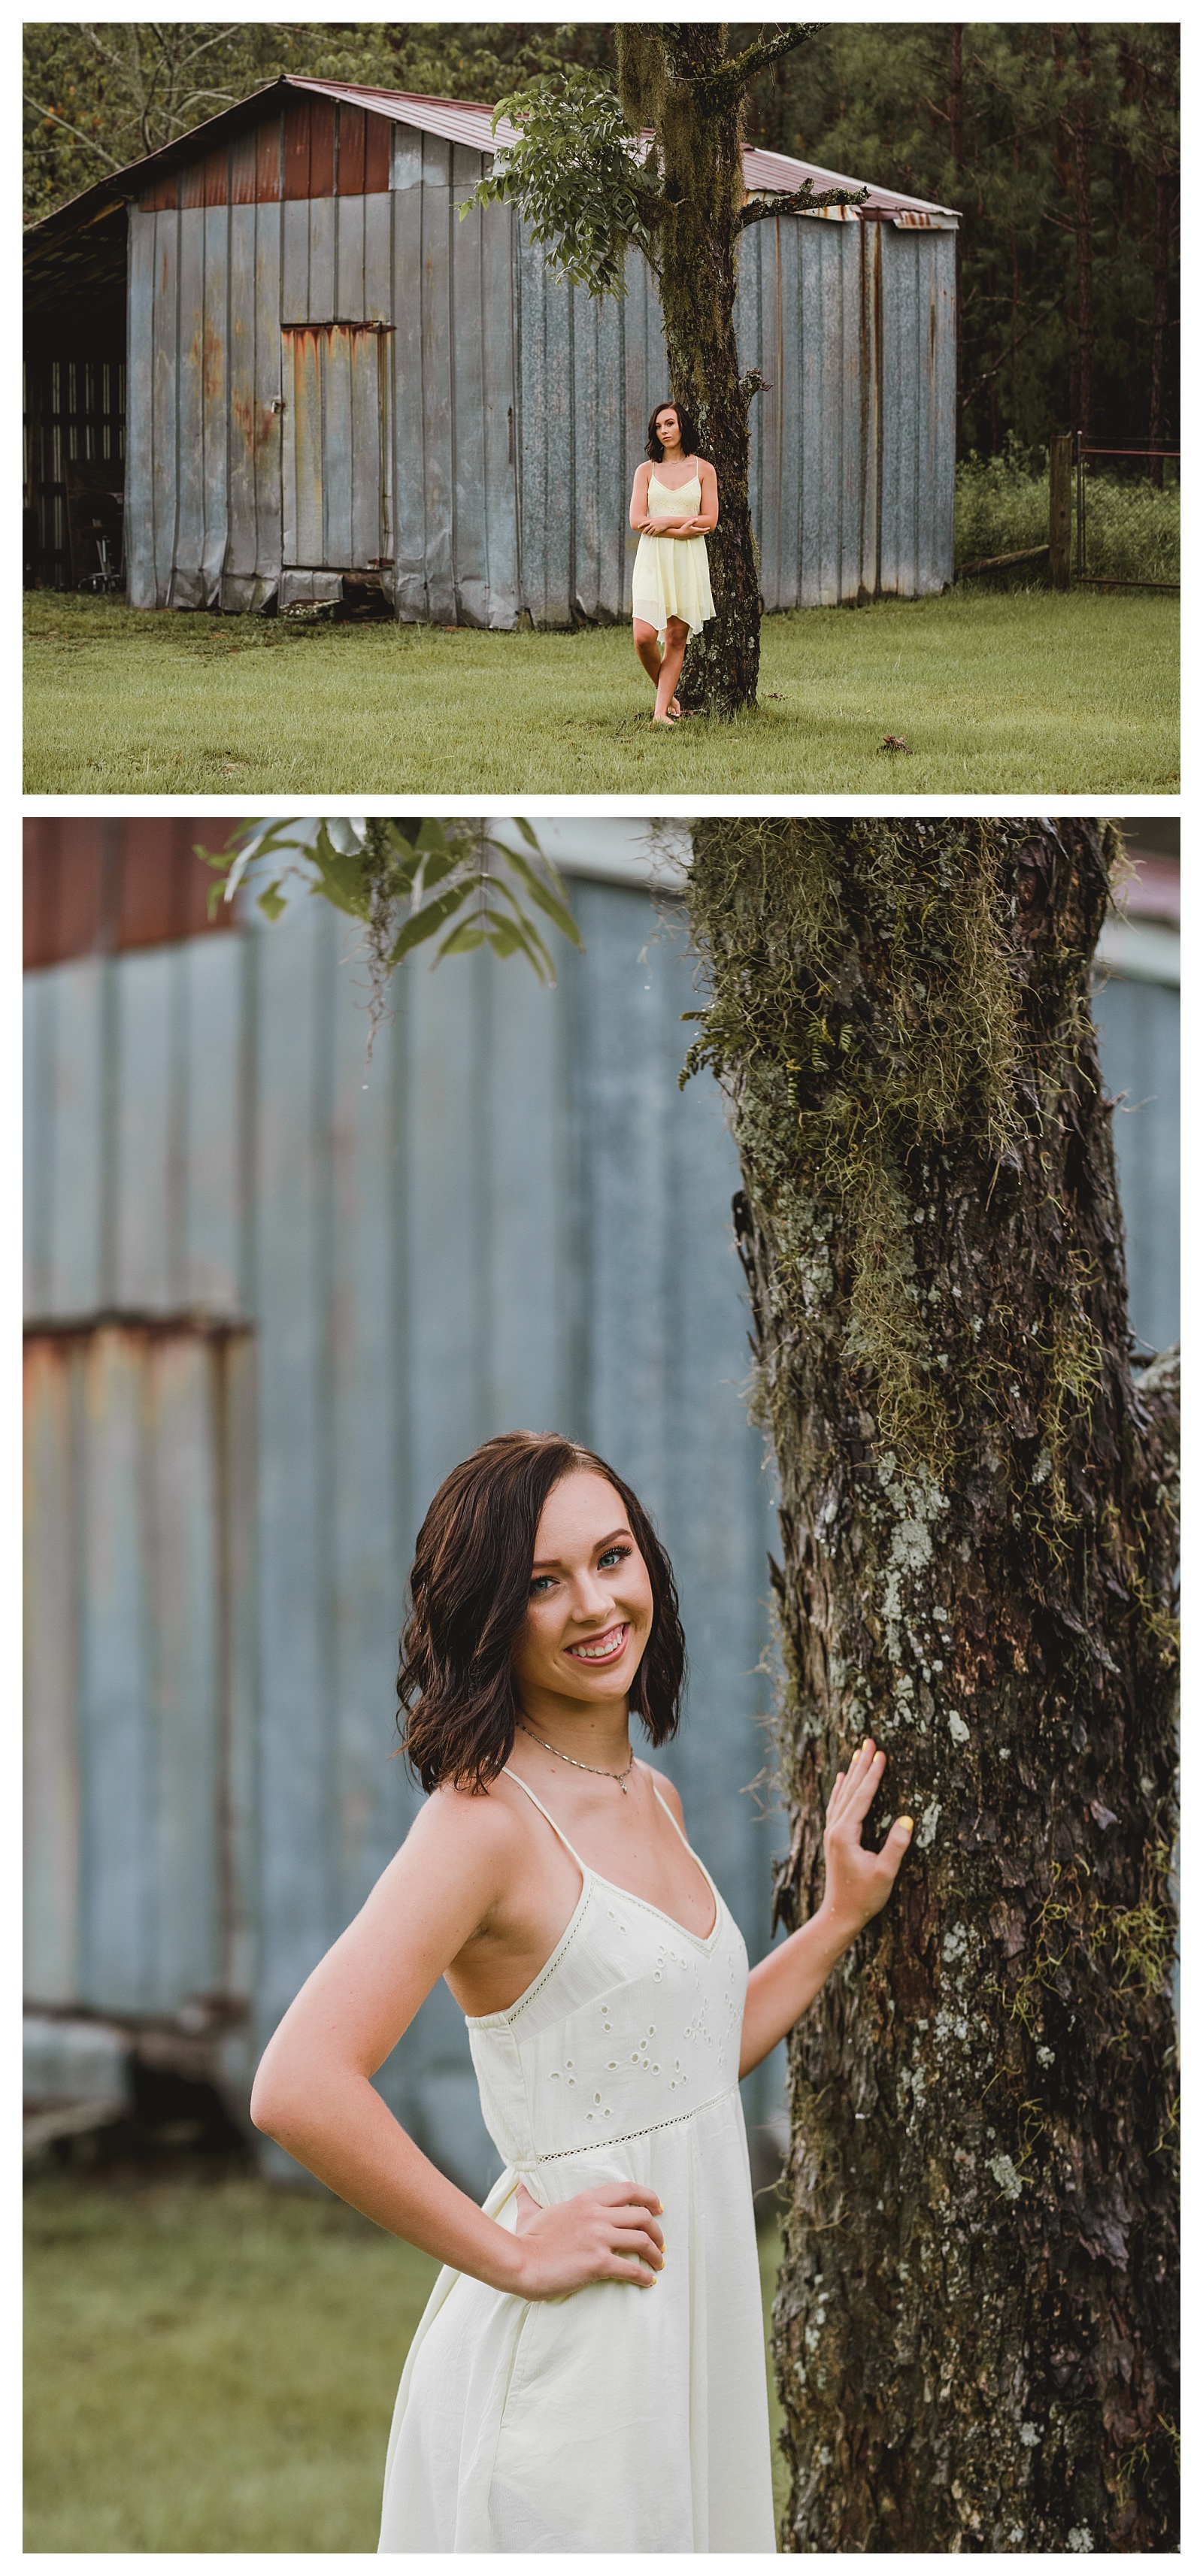 Rustic barn senior photography by Shelly Williams